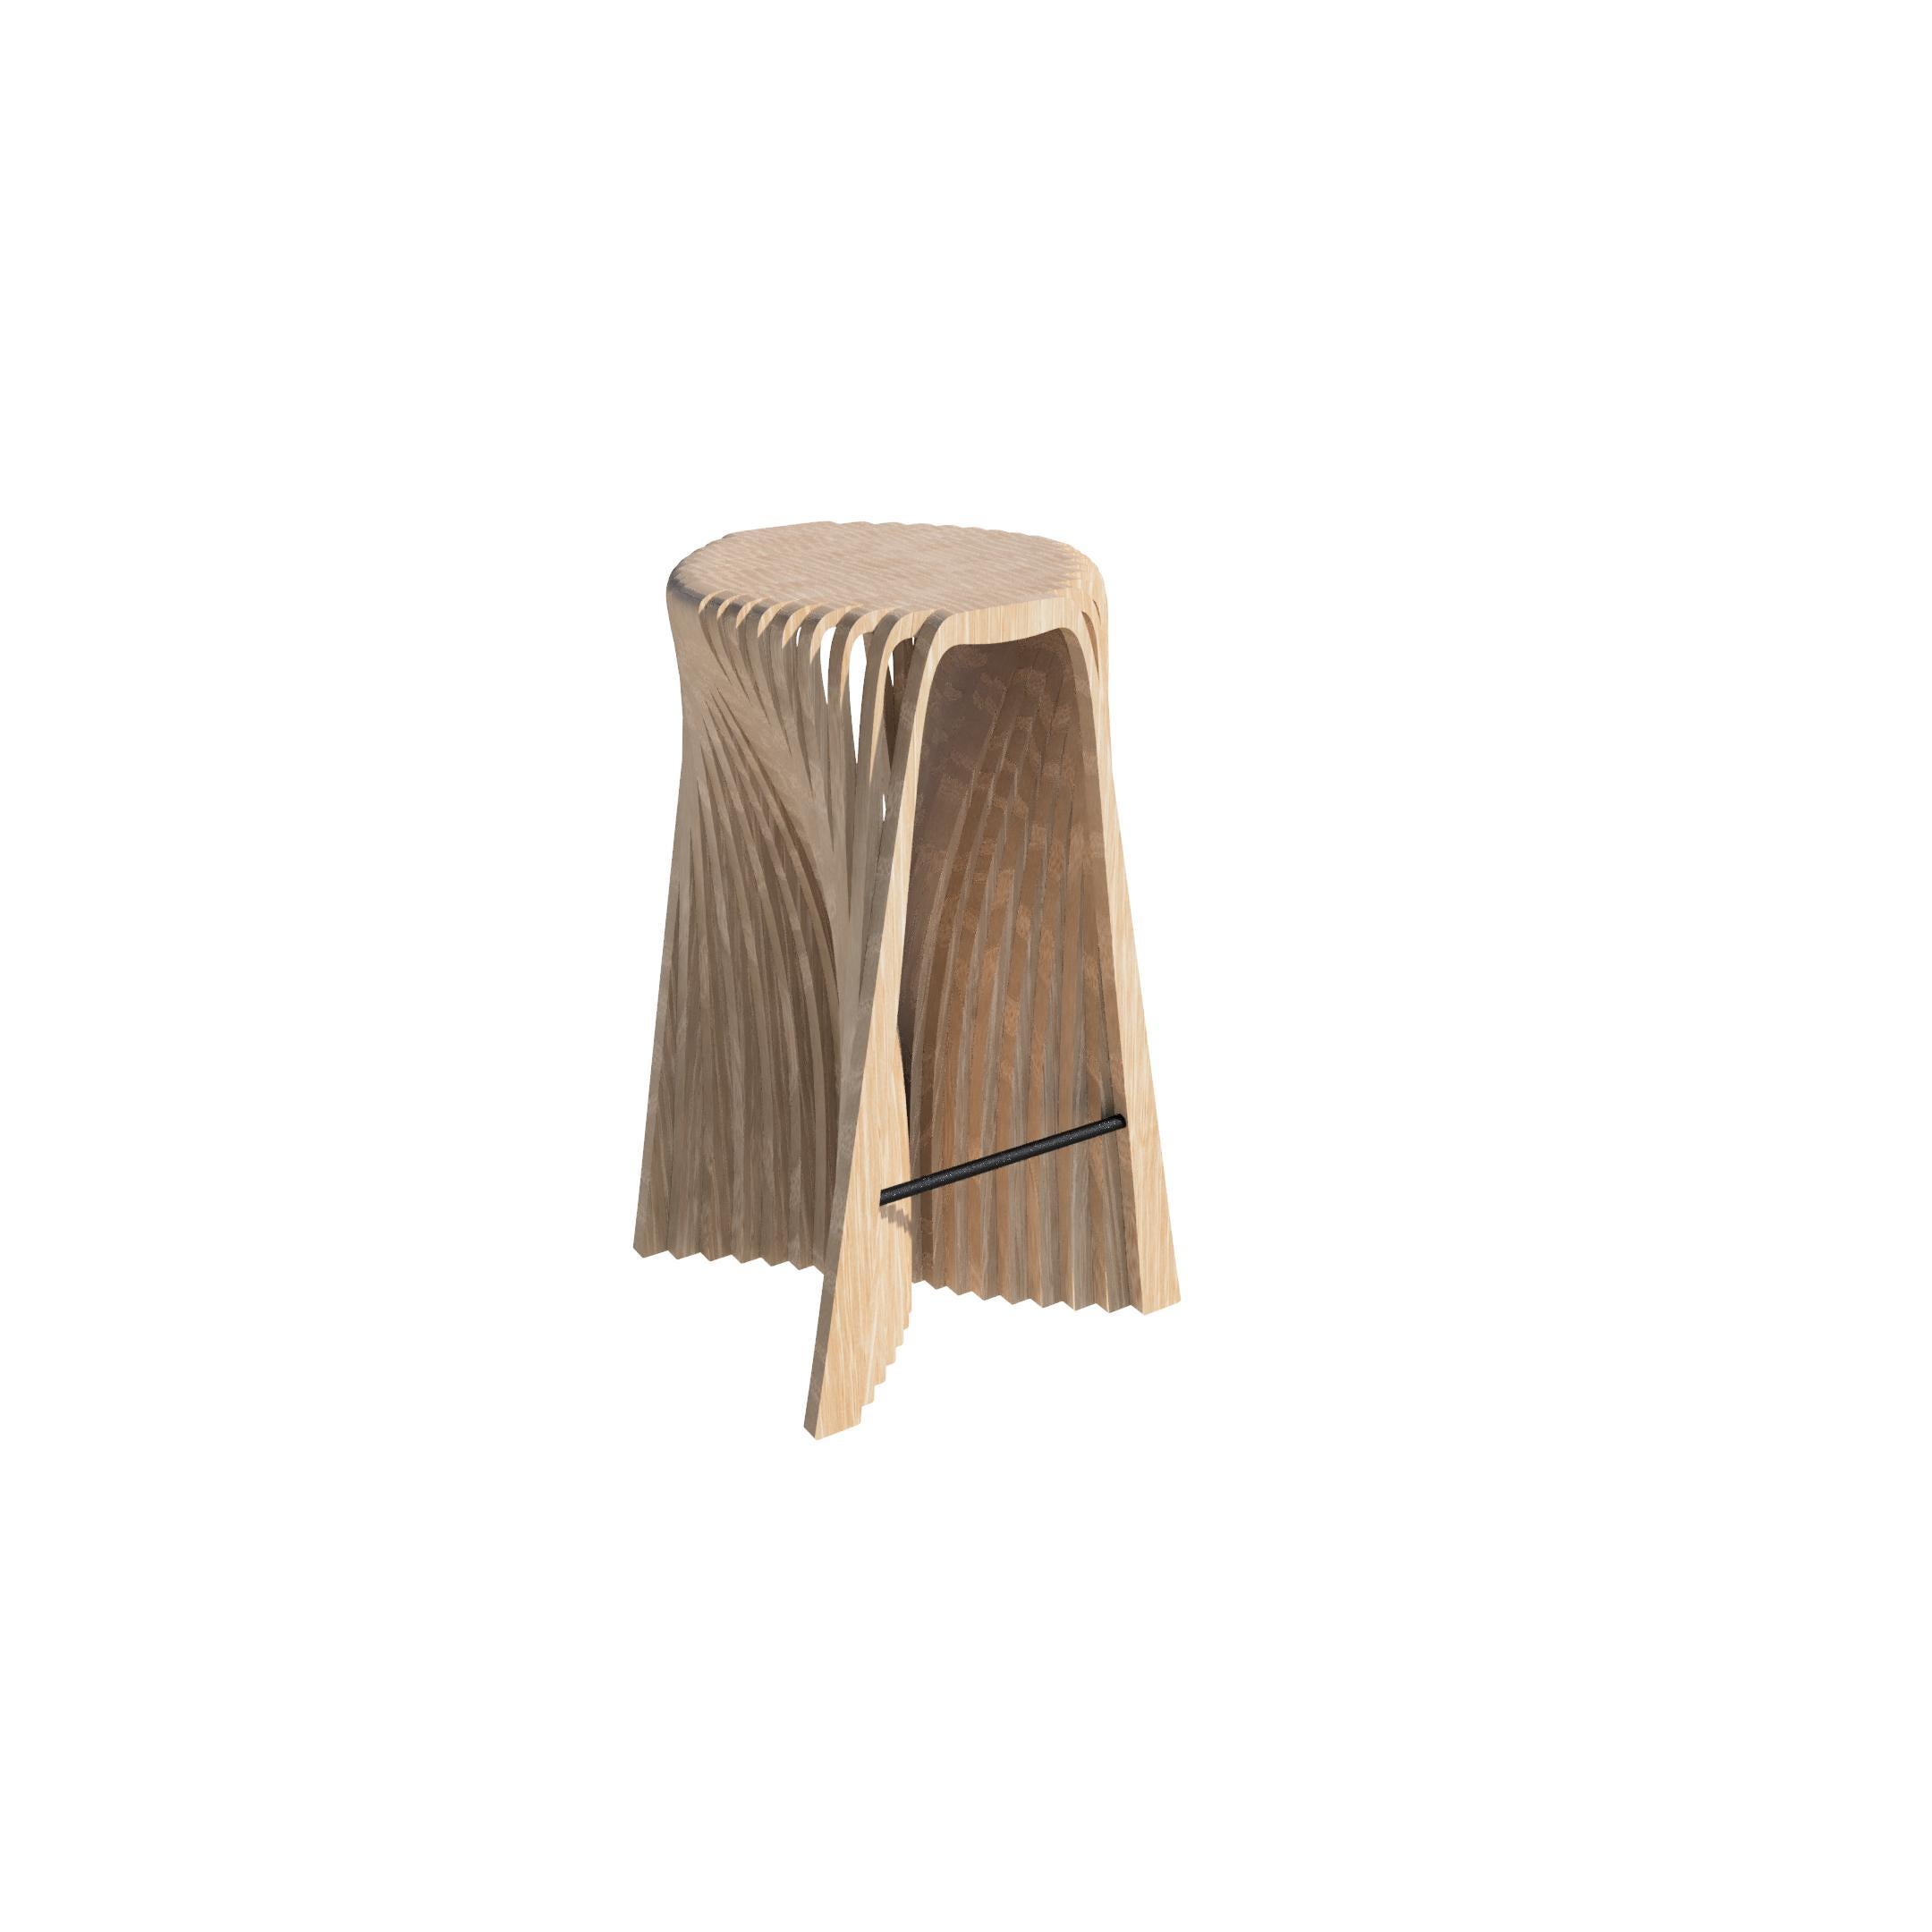 Wooden Stool 'crown', a Different Design In Good Condition For Sale In Miami, FL